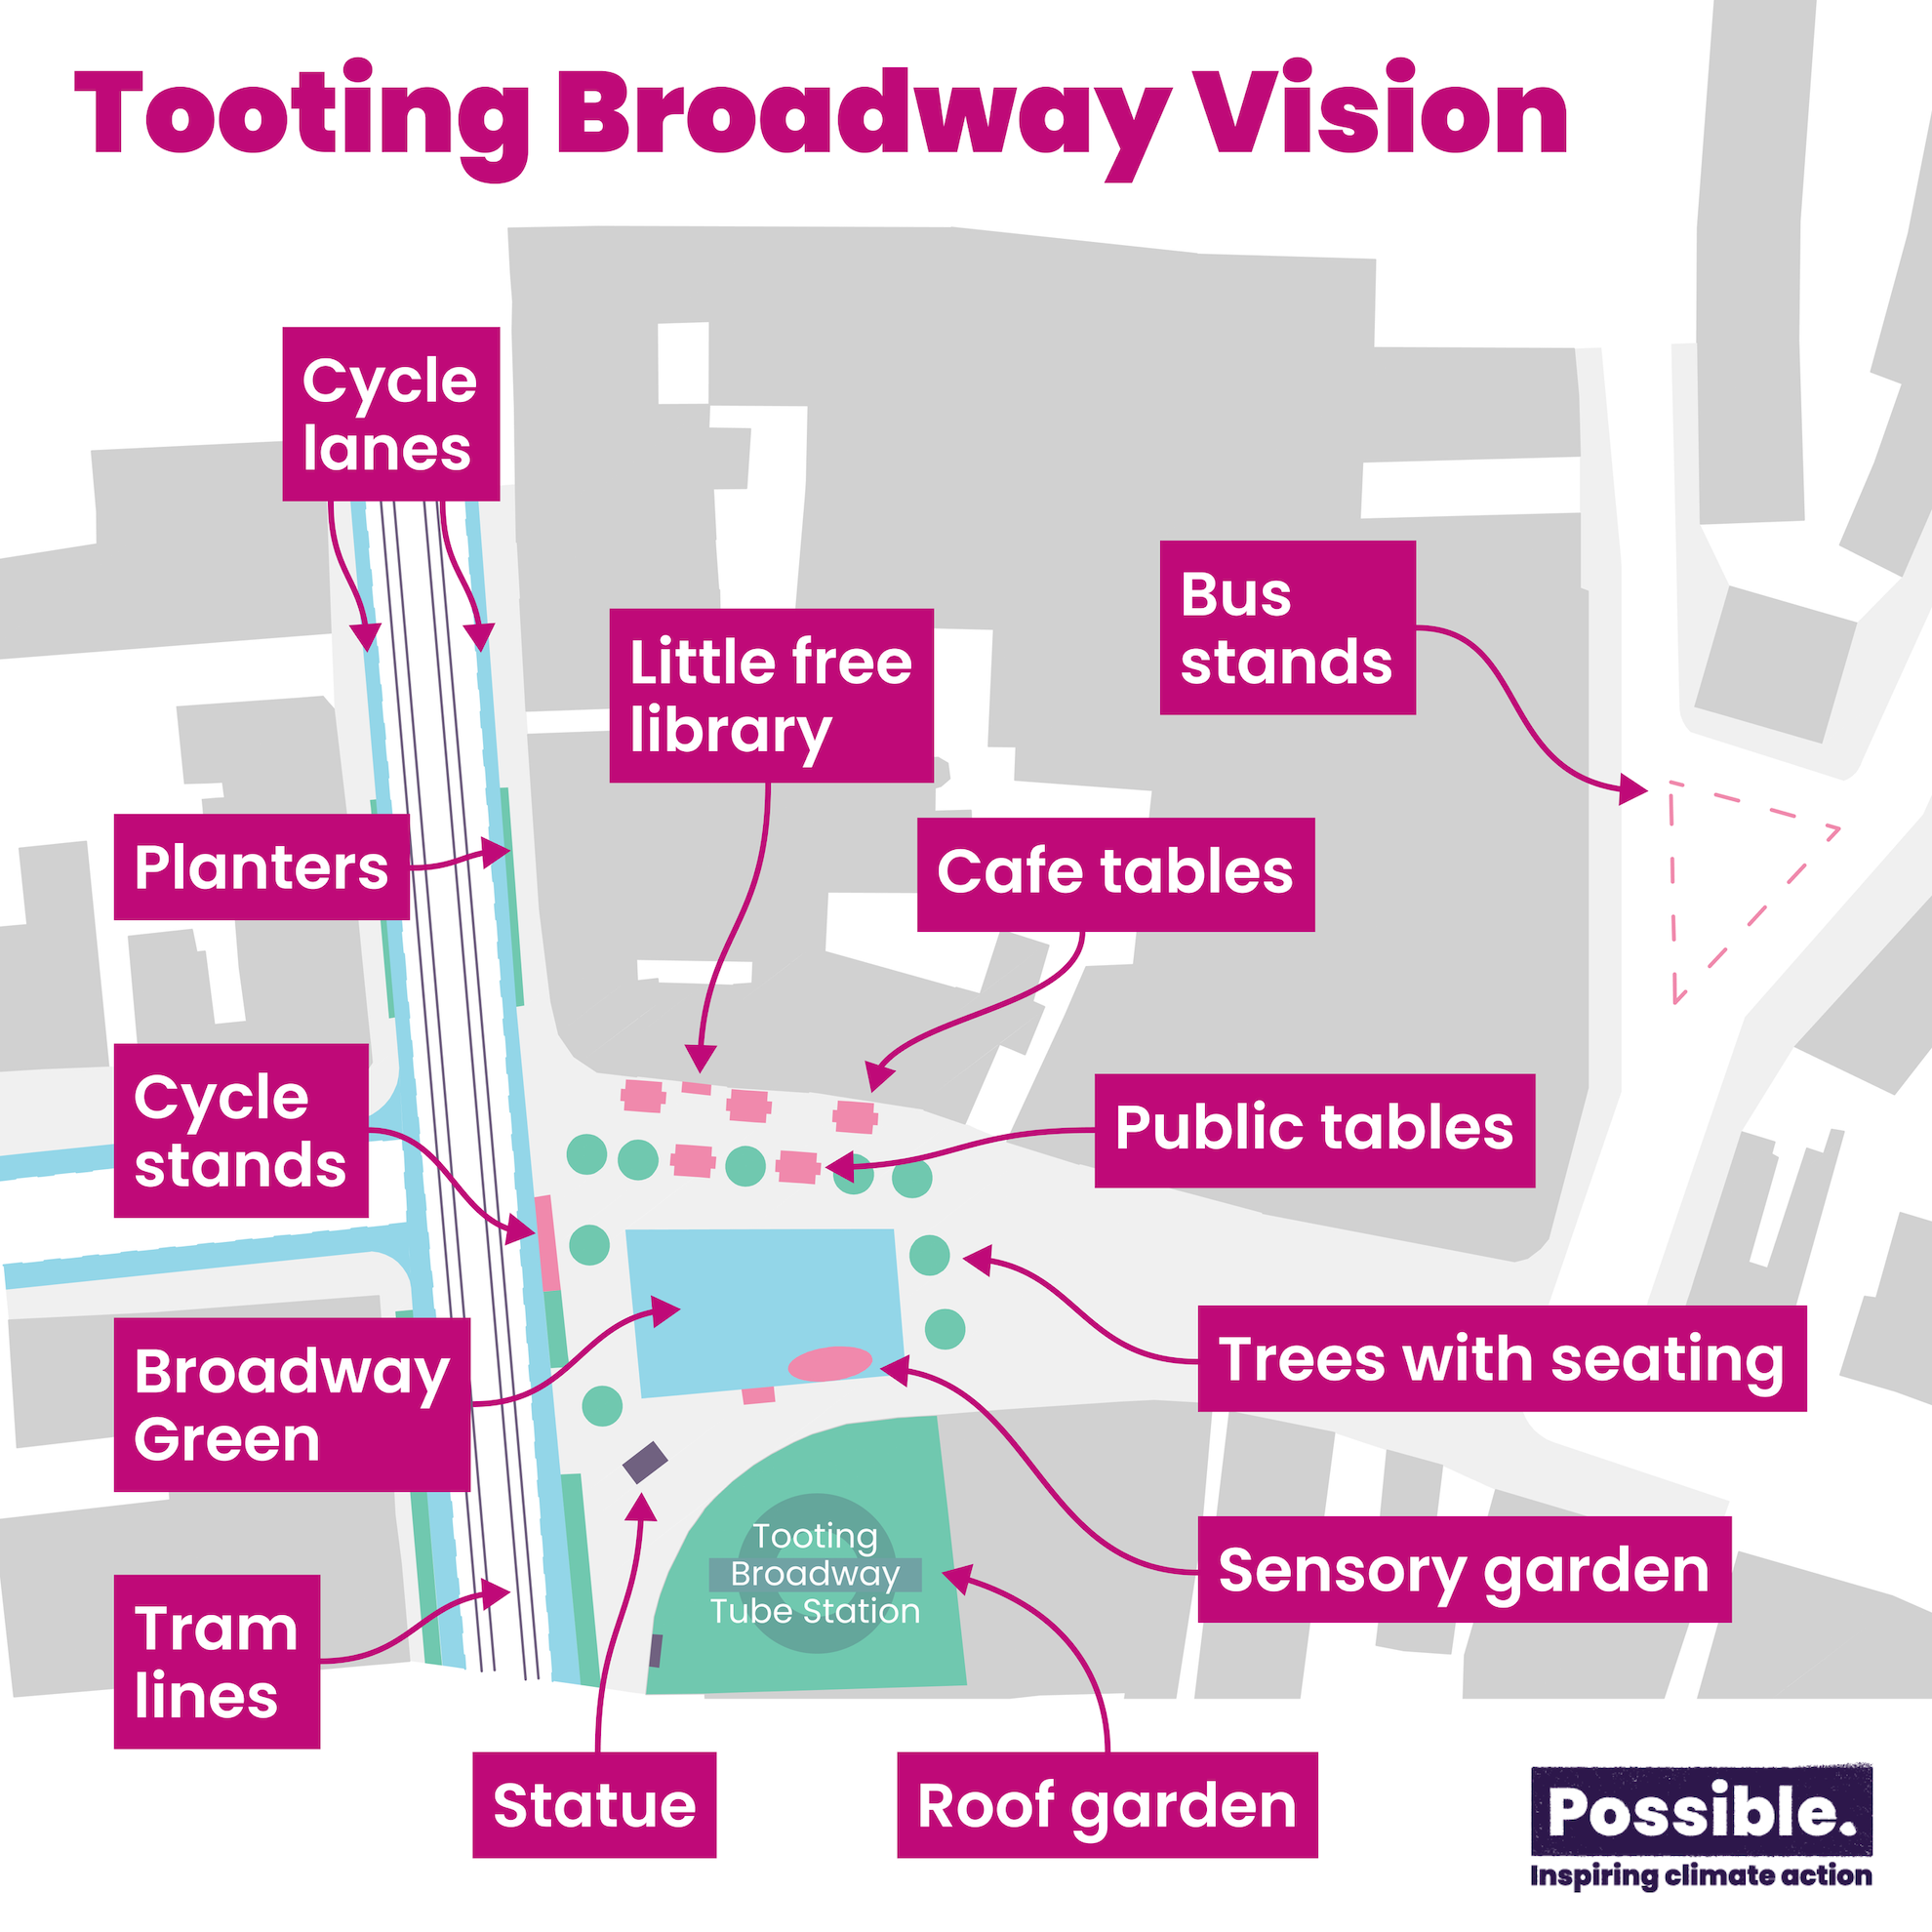 Illustration of Tooting Broadway vision